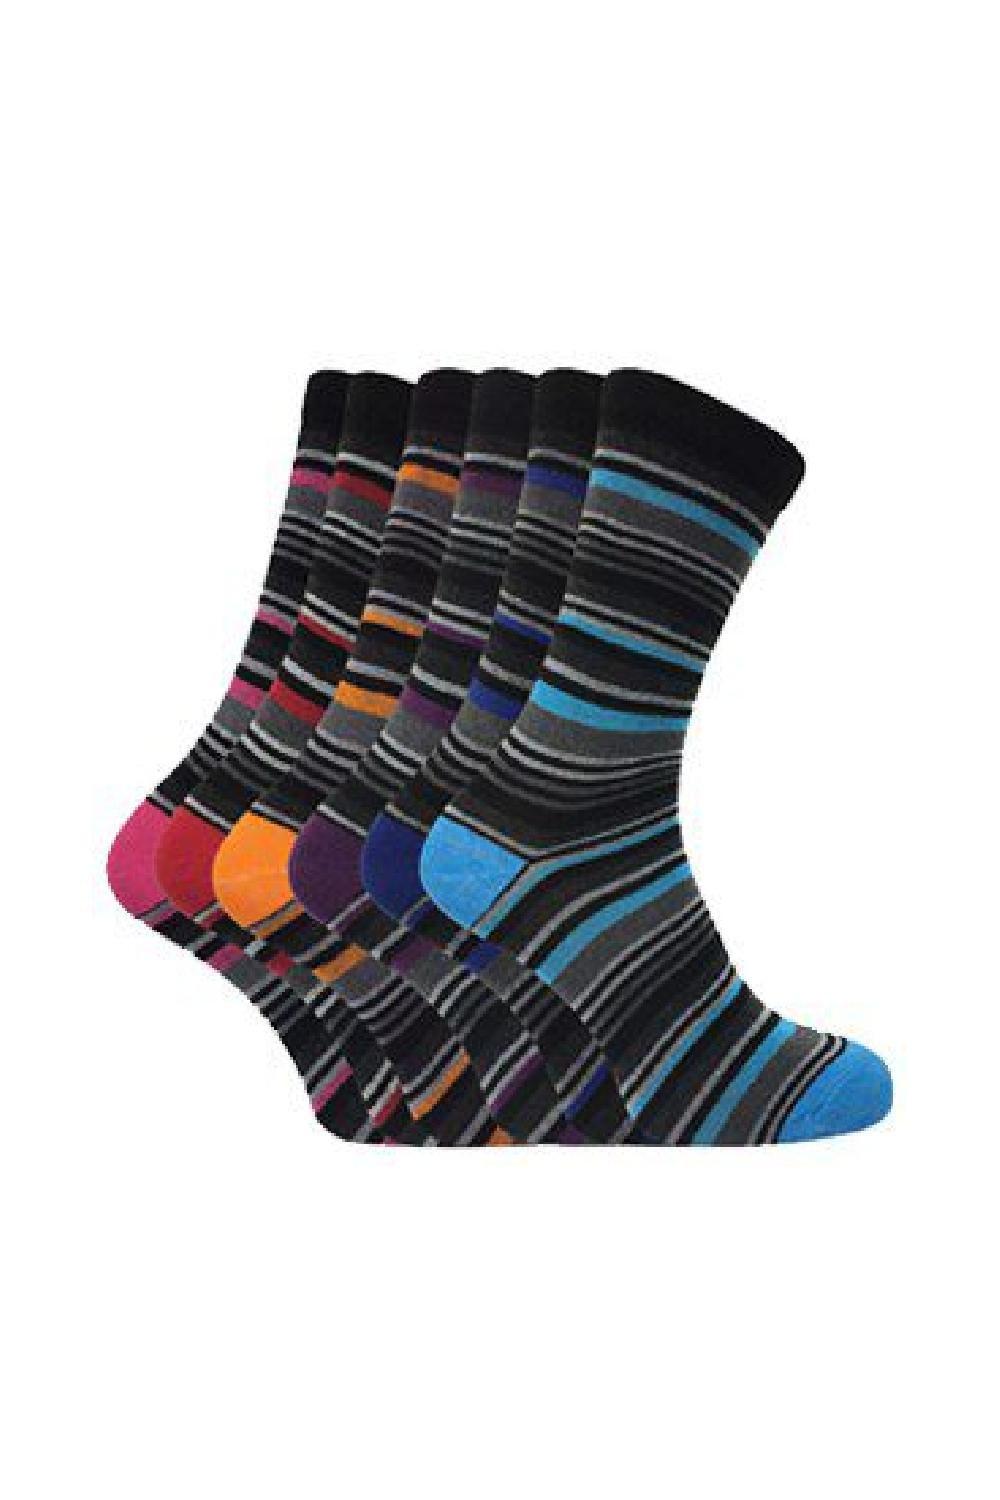 6 Pairs Patterned Coloured Soft Cotton Dress Socks